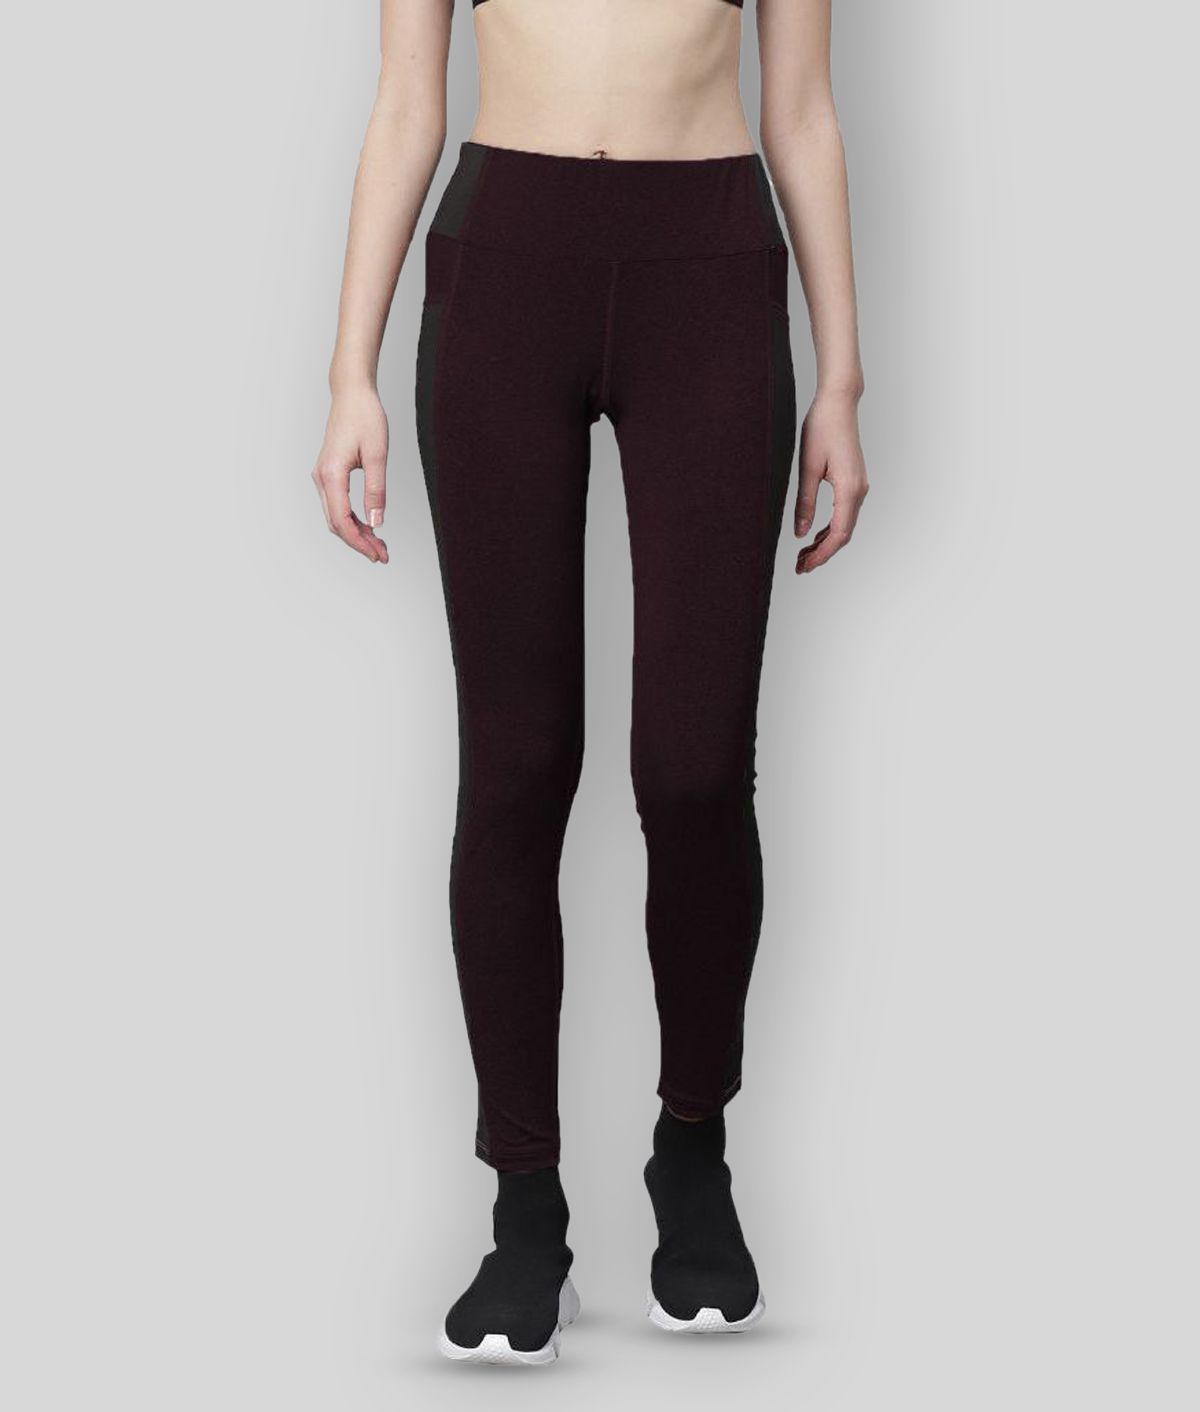 Chkokko - Polyester Regular Fit Maroon Women's Sports Tights ( Pack of 1 )